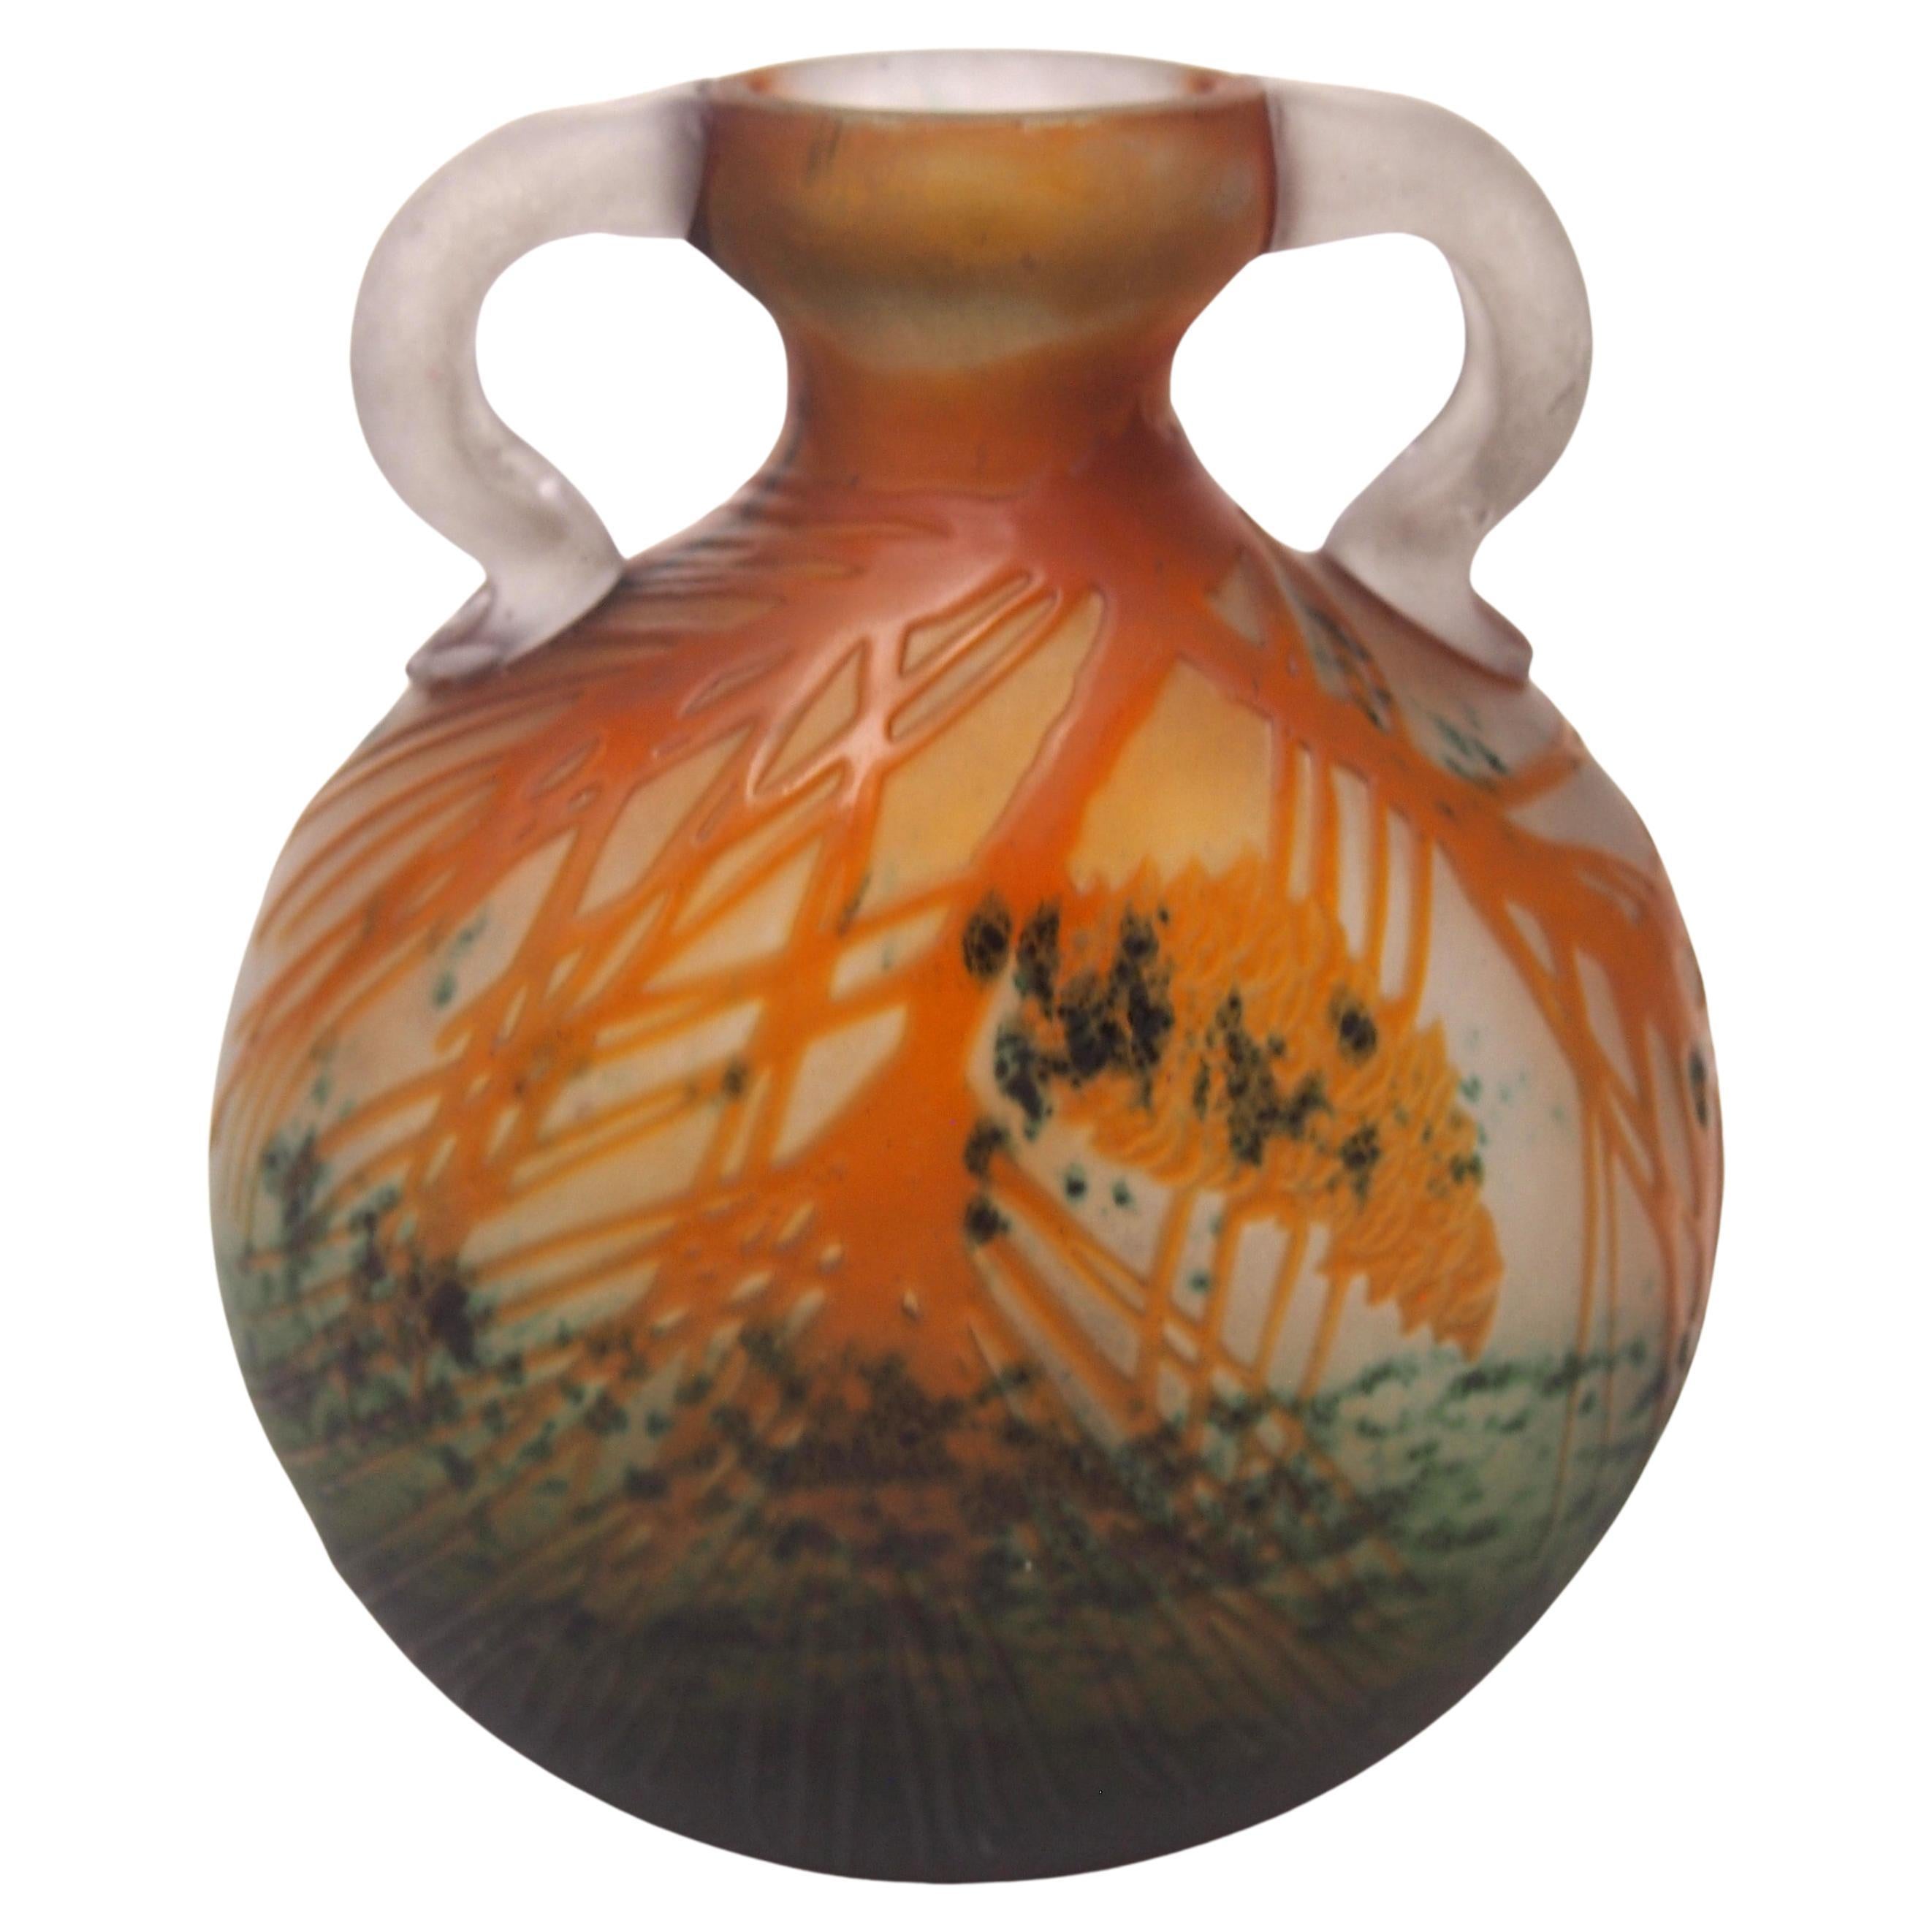 Exceptional French Art Nouveau Marbled Emile Galle Cameo Glass Vase -Fircones  For Sale